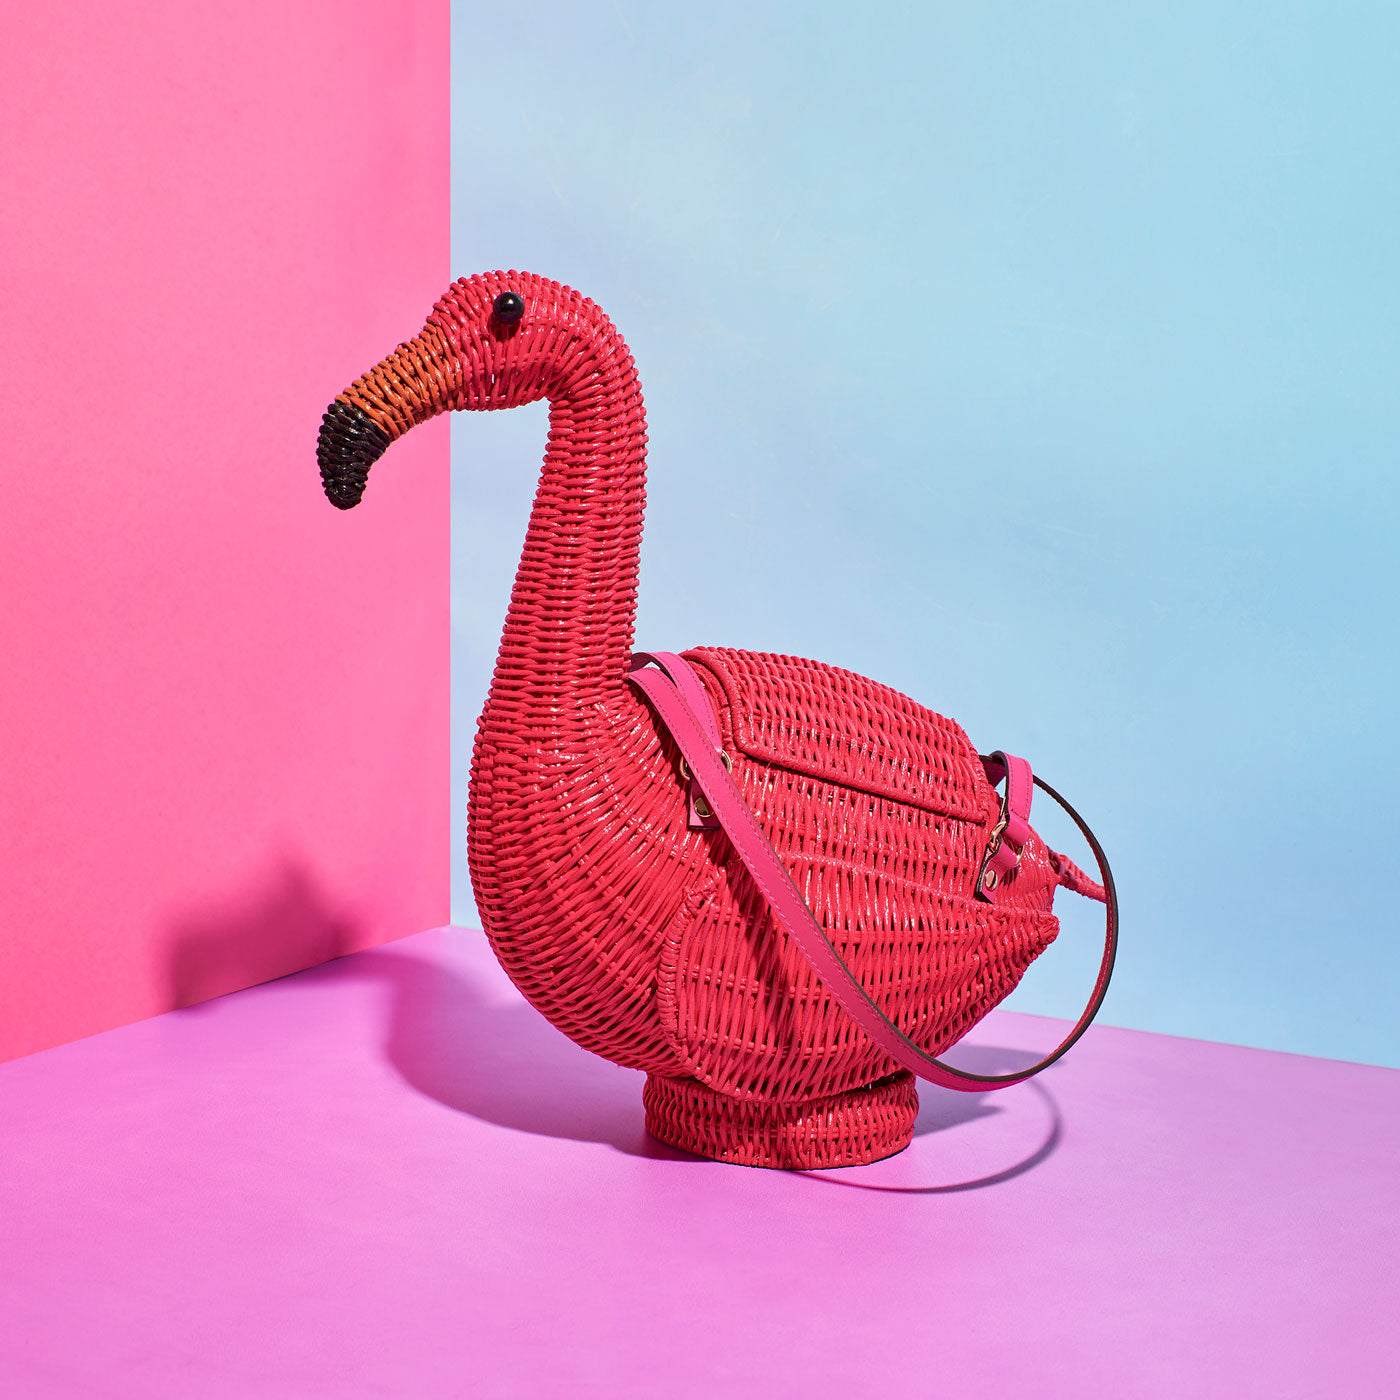 Wicker Darling's flamingo purse on a colourful background